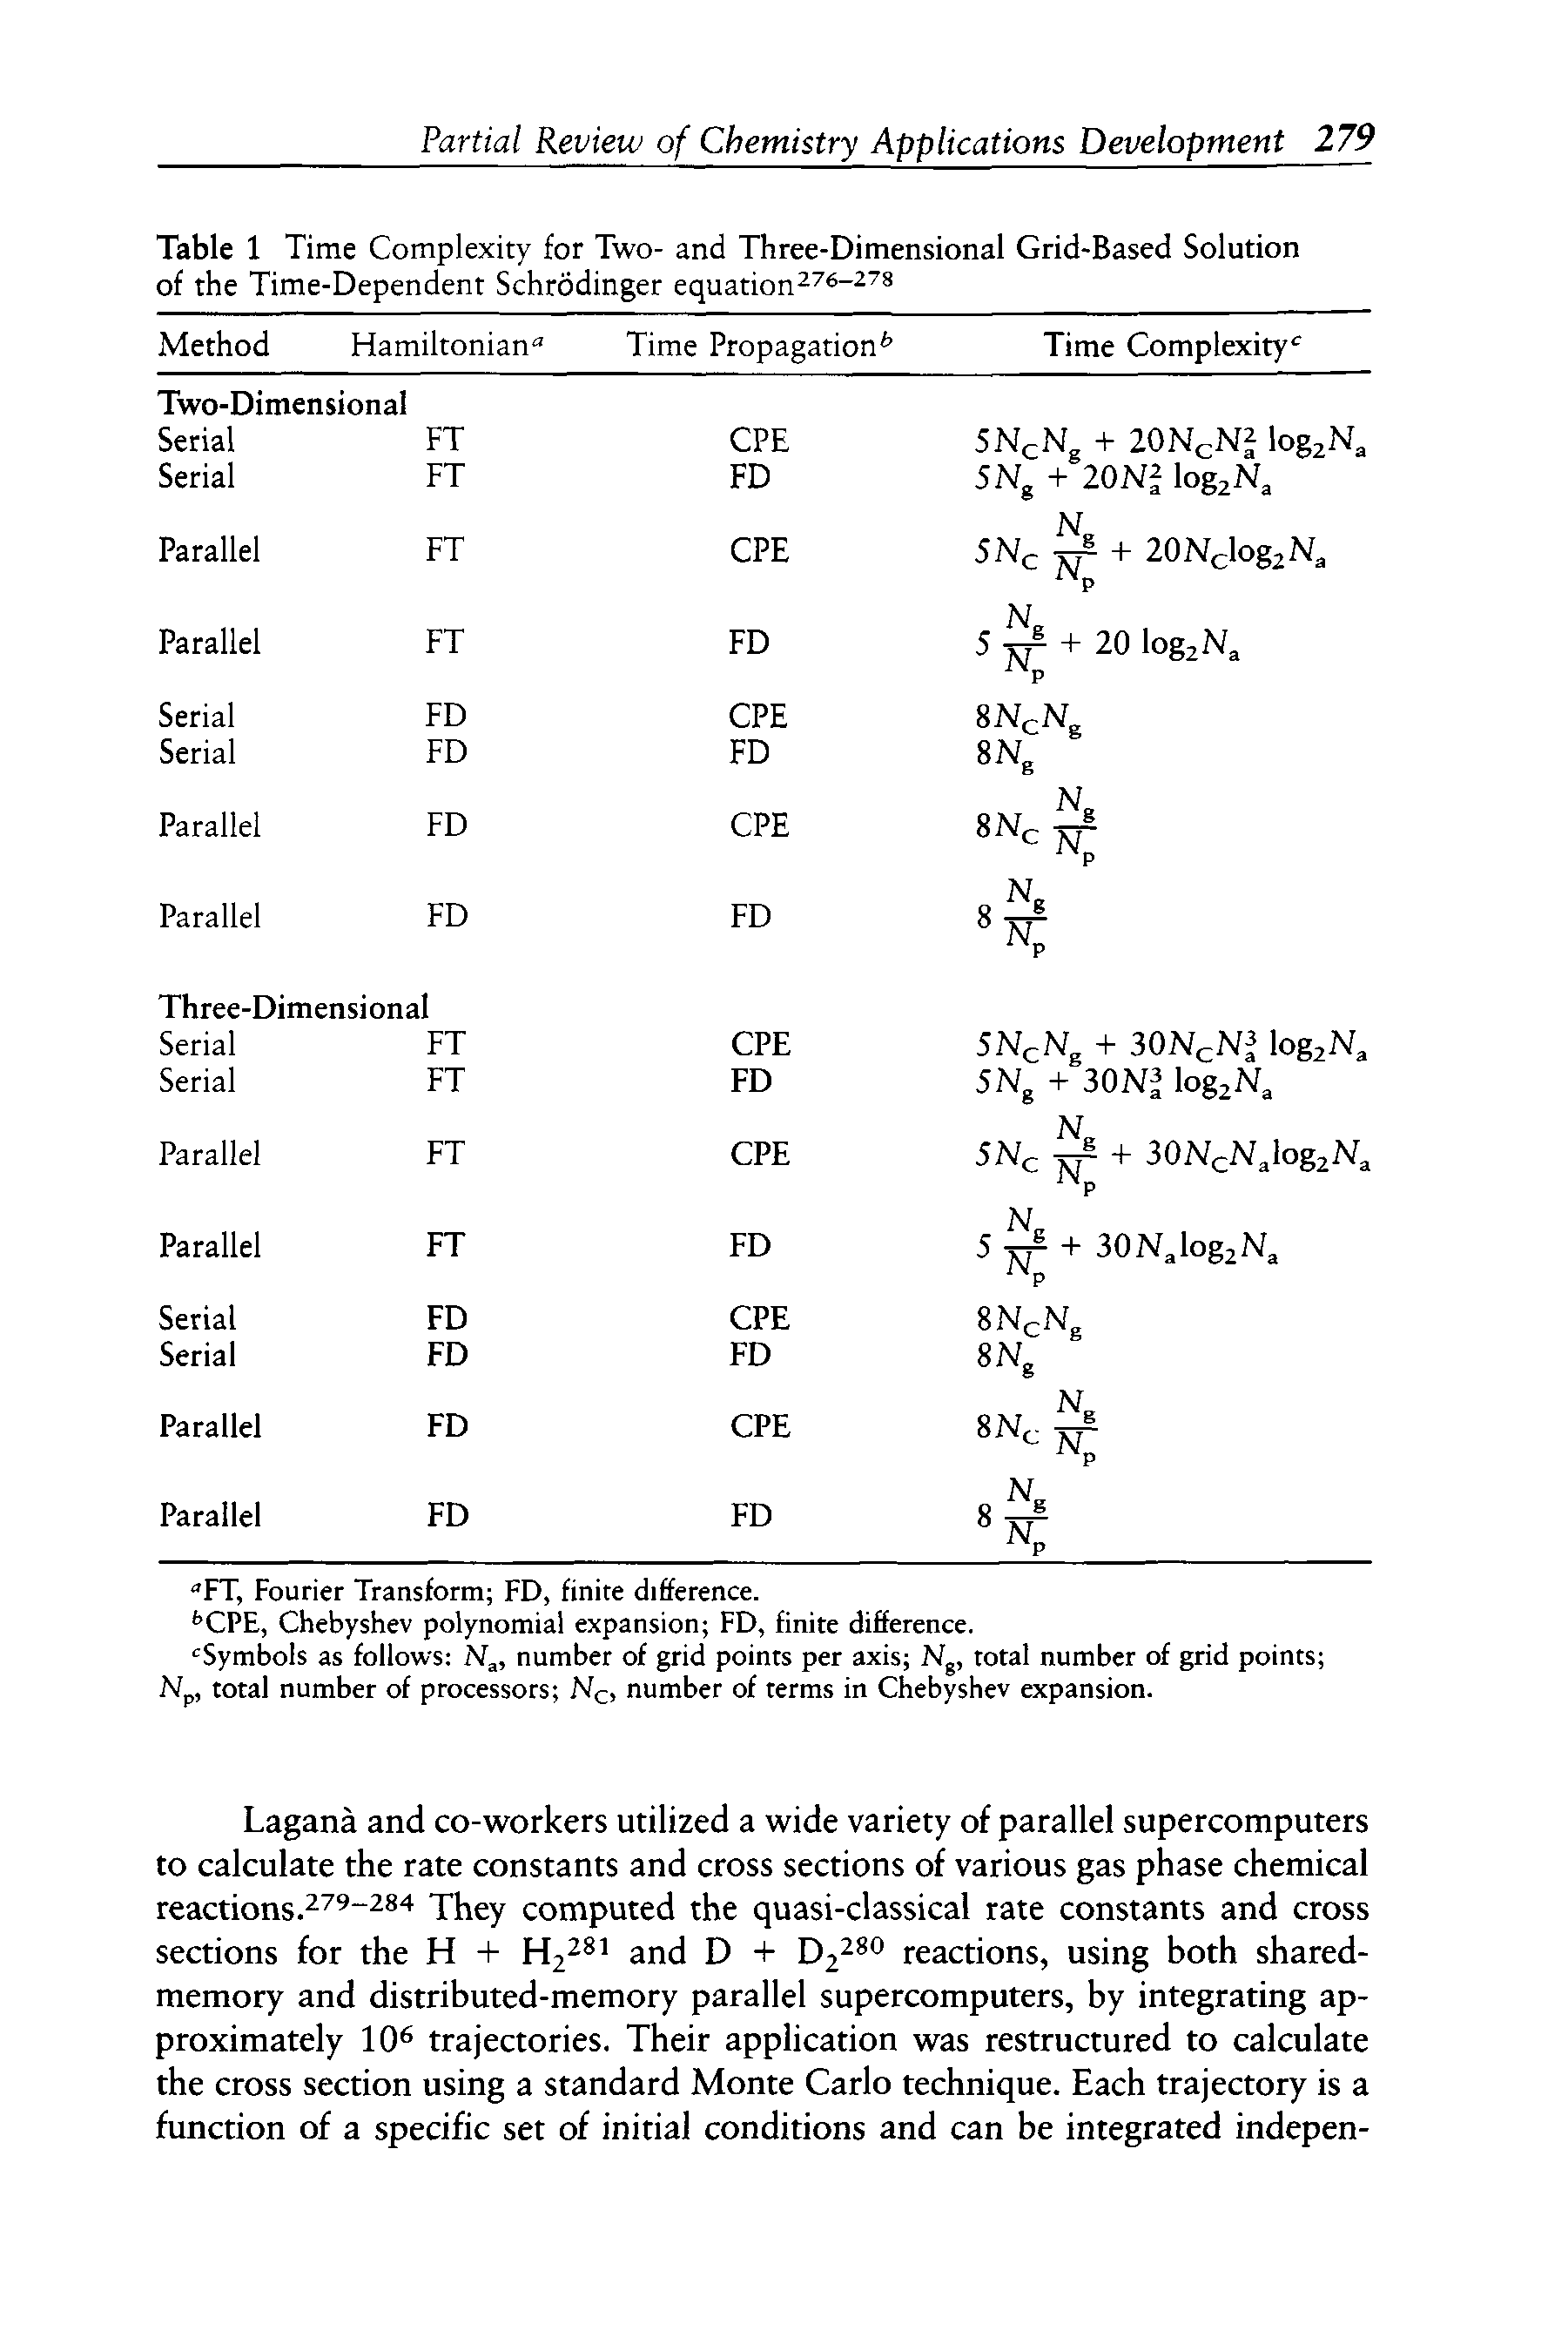 Table 1 Time Complexity for Two- and Three-Dimensional Grid-Based Solution of the Time-Dependent Schrodinger equation s- rs...